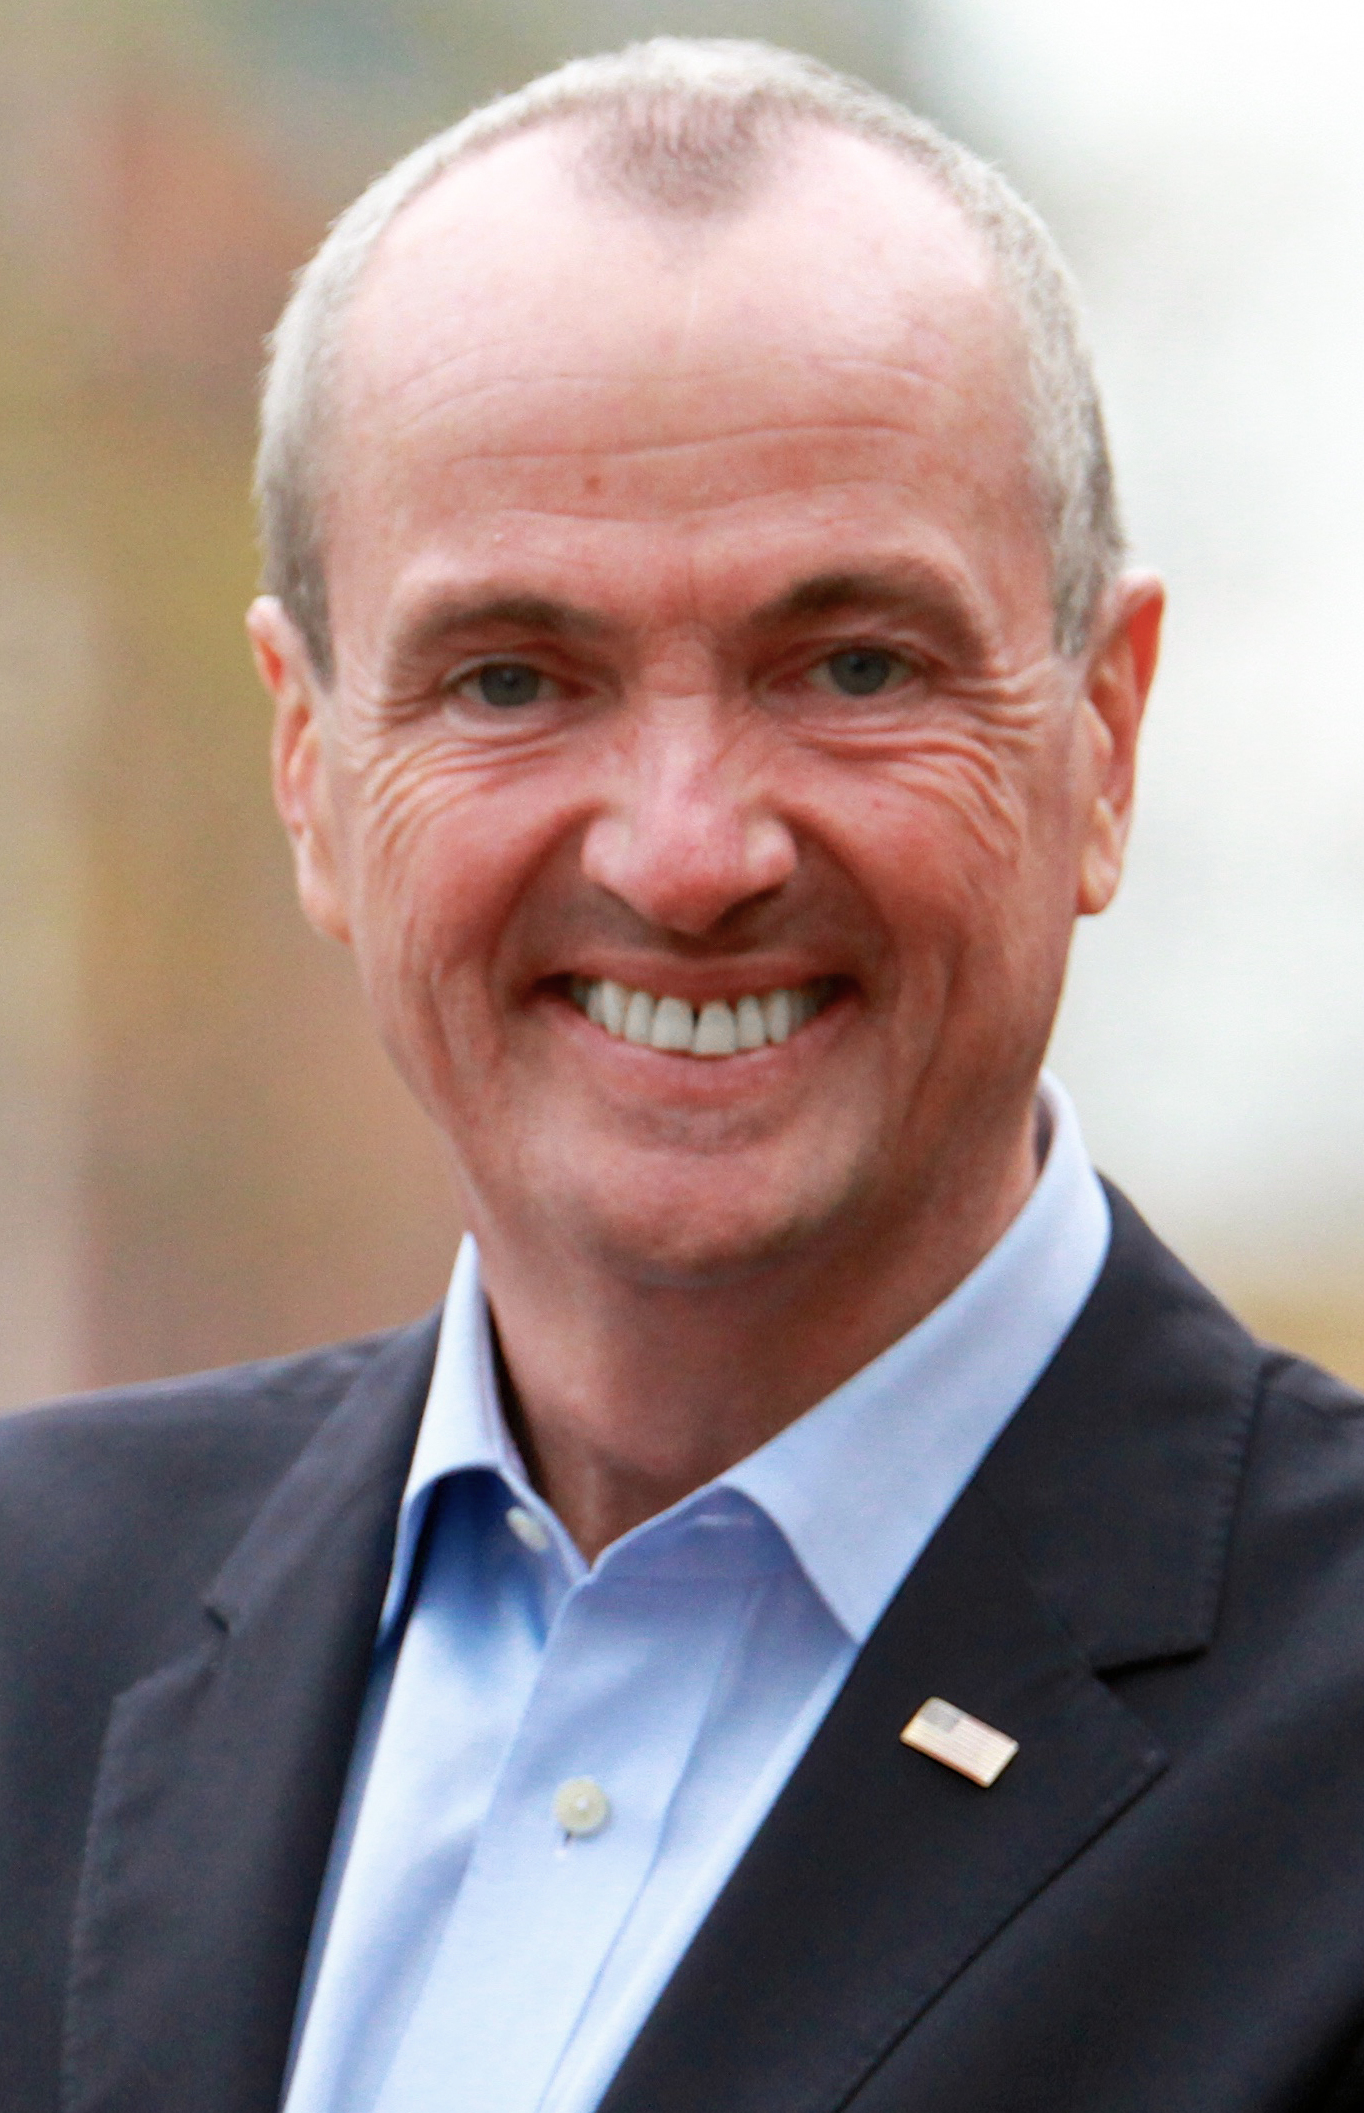 How tall is Phil Murphy?